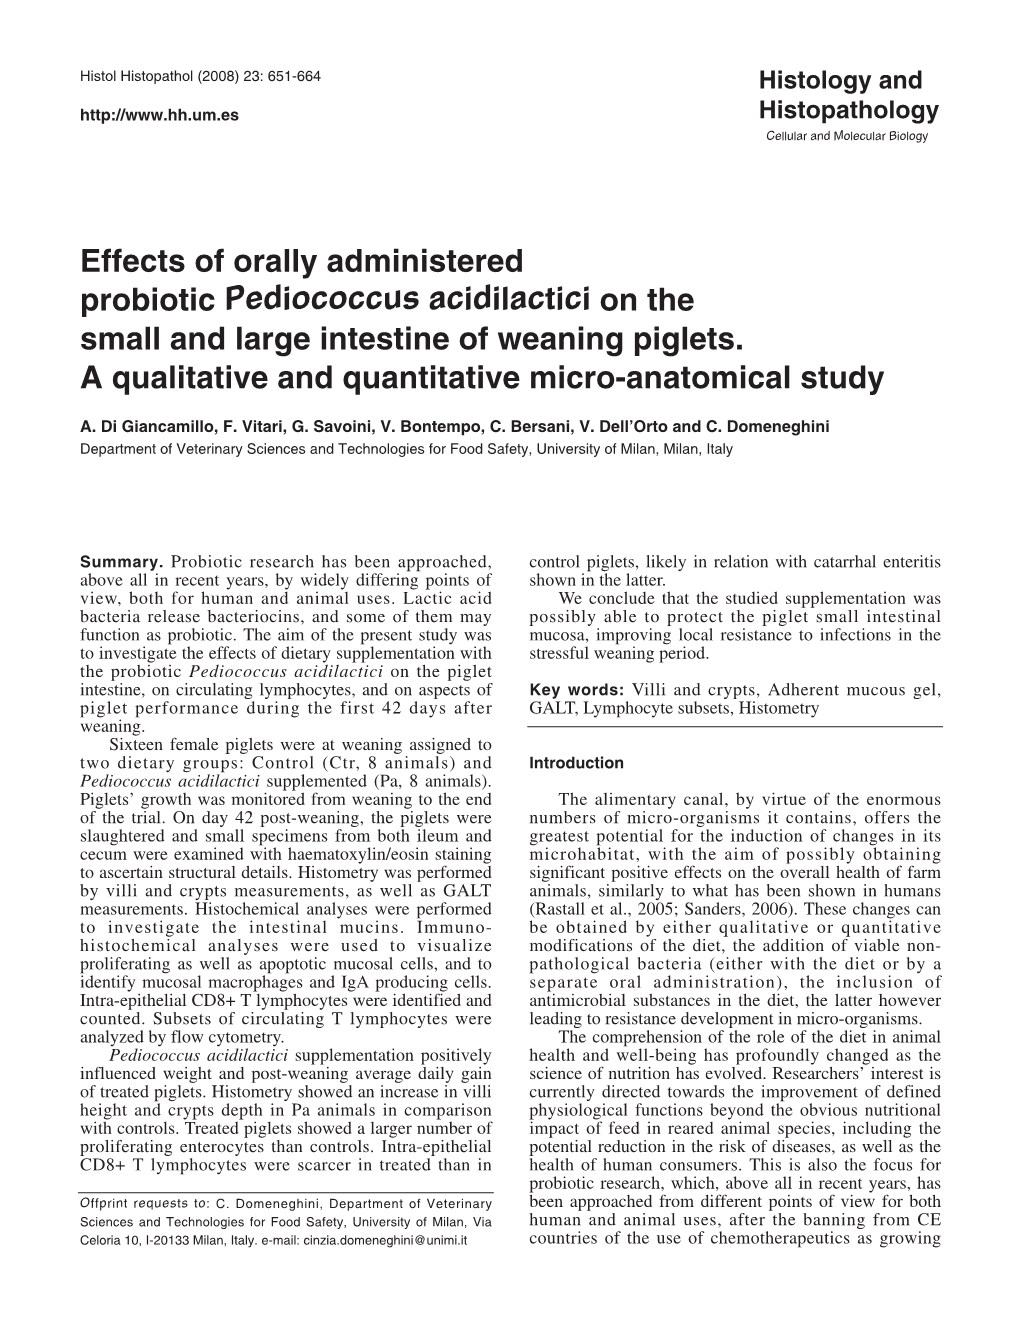 Effects of Orally Administered Probiotic Pediococcus Acidilactici on the Small and Large Intestine of Weaning Piglets